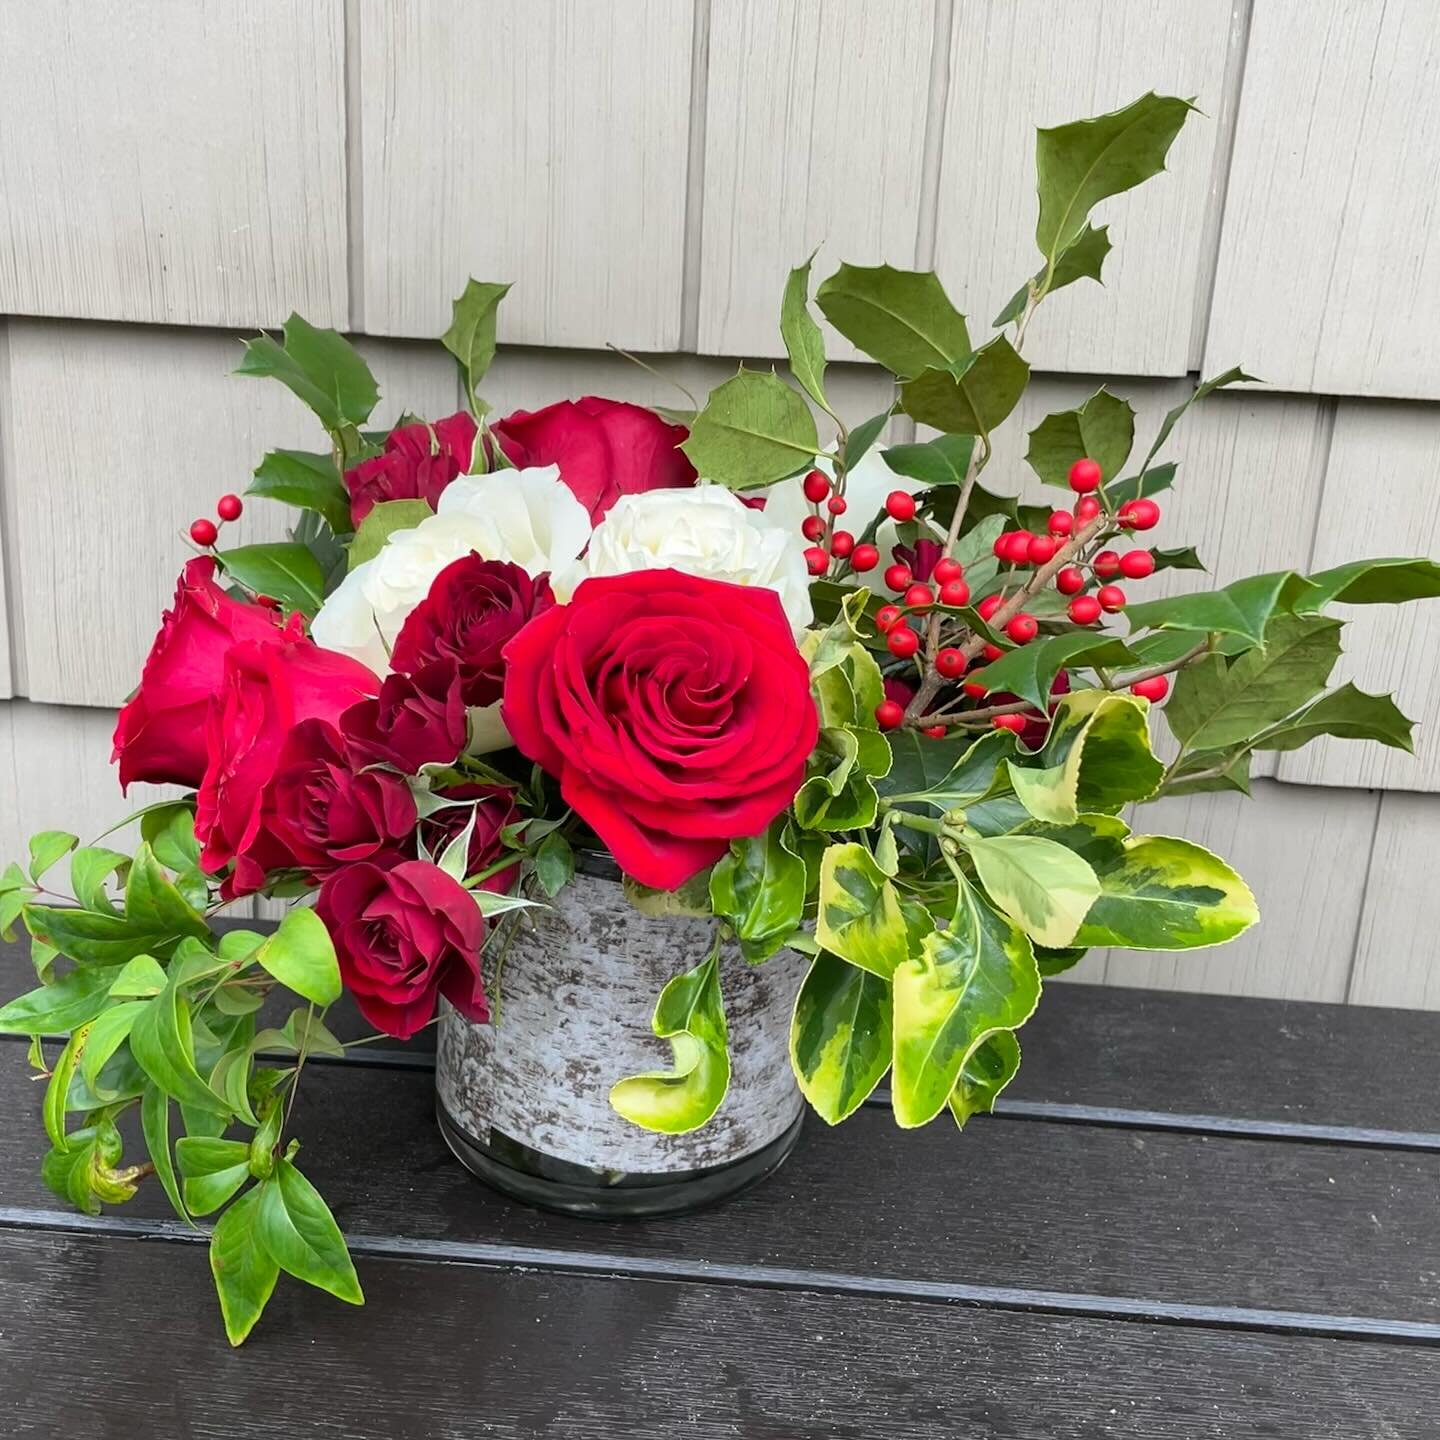 Christmas flowers are now listed in the shop! Whether you&rsquo;re looking for a hostess gift or a centerpiece, Brookfield Blooms has got you covered 🎄